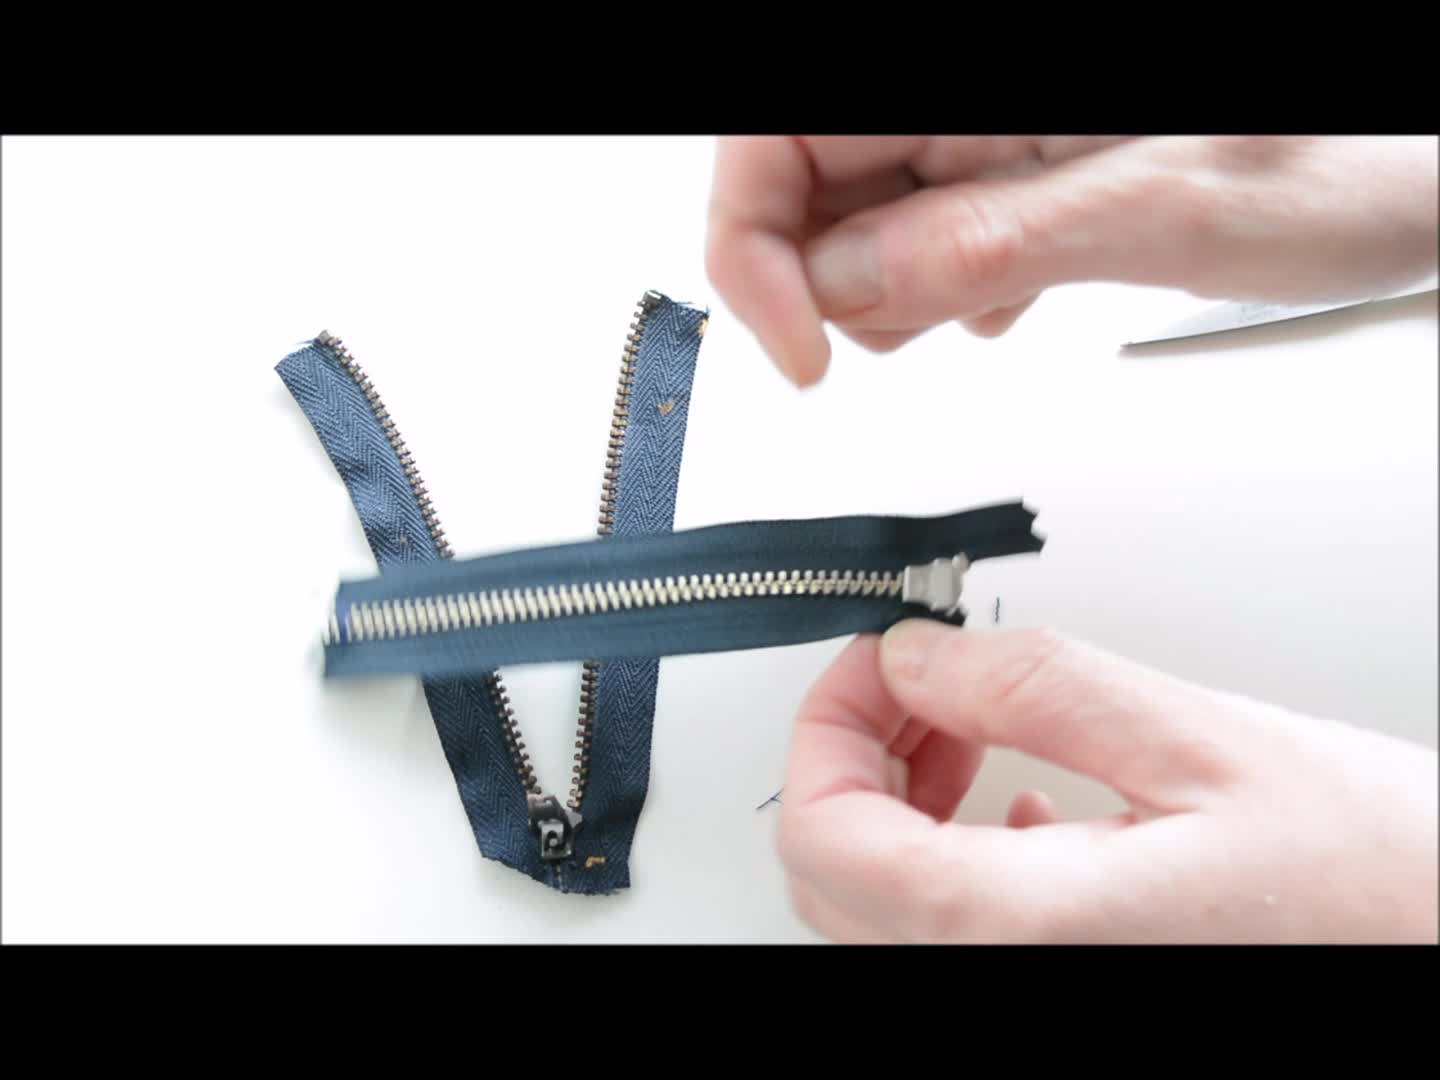 How to fix a zipper on jeans, replace the zip in a pair of jeans and keep  the original top stitching · VickyMyersCreations